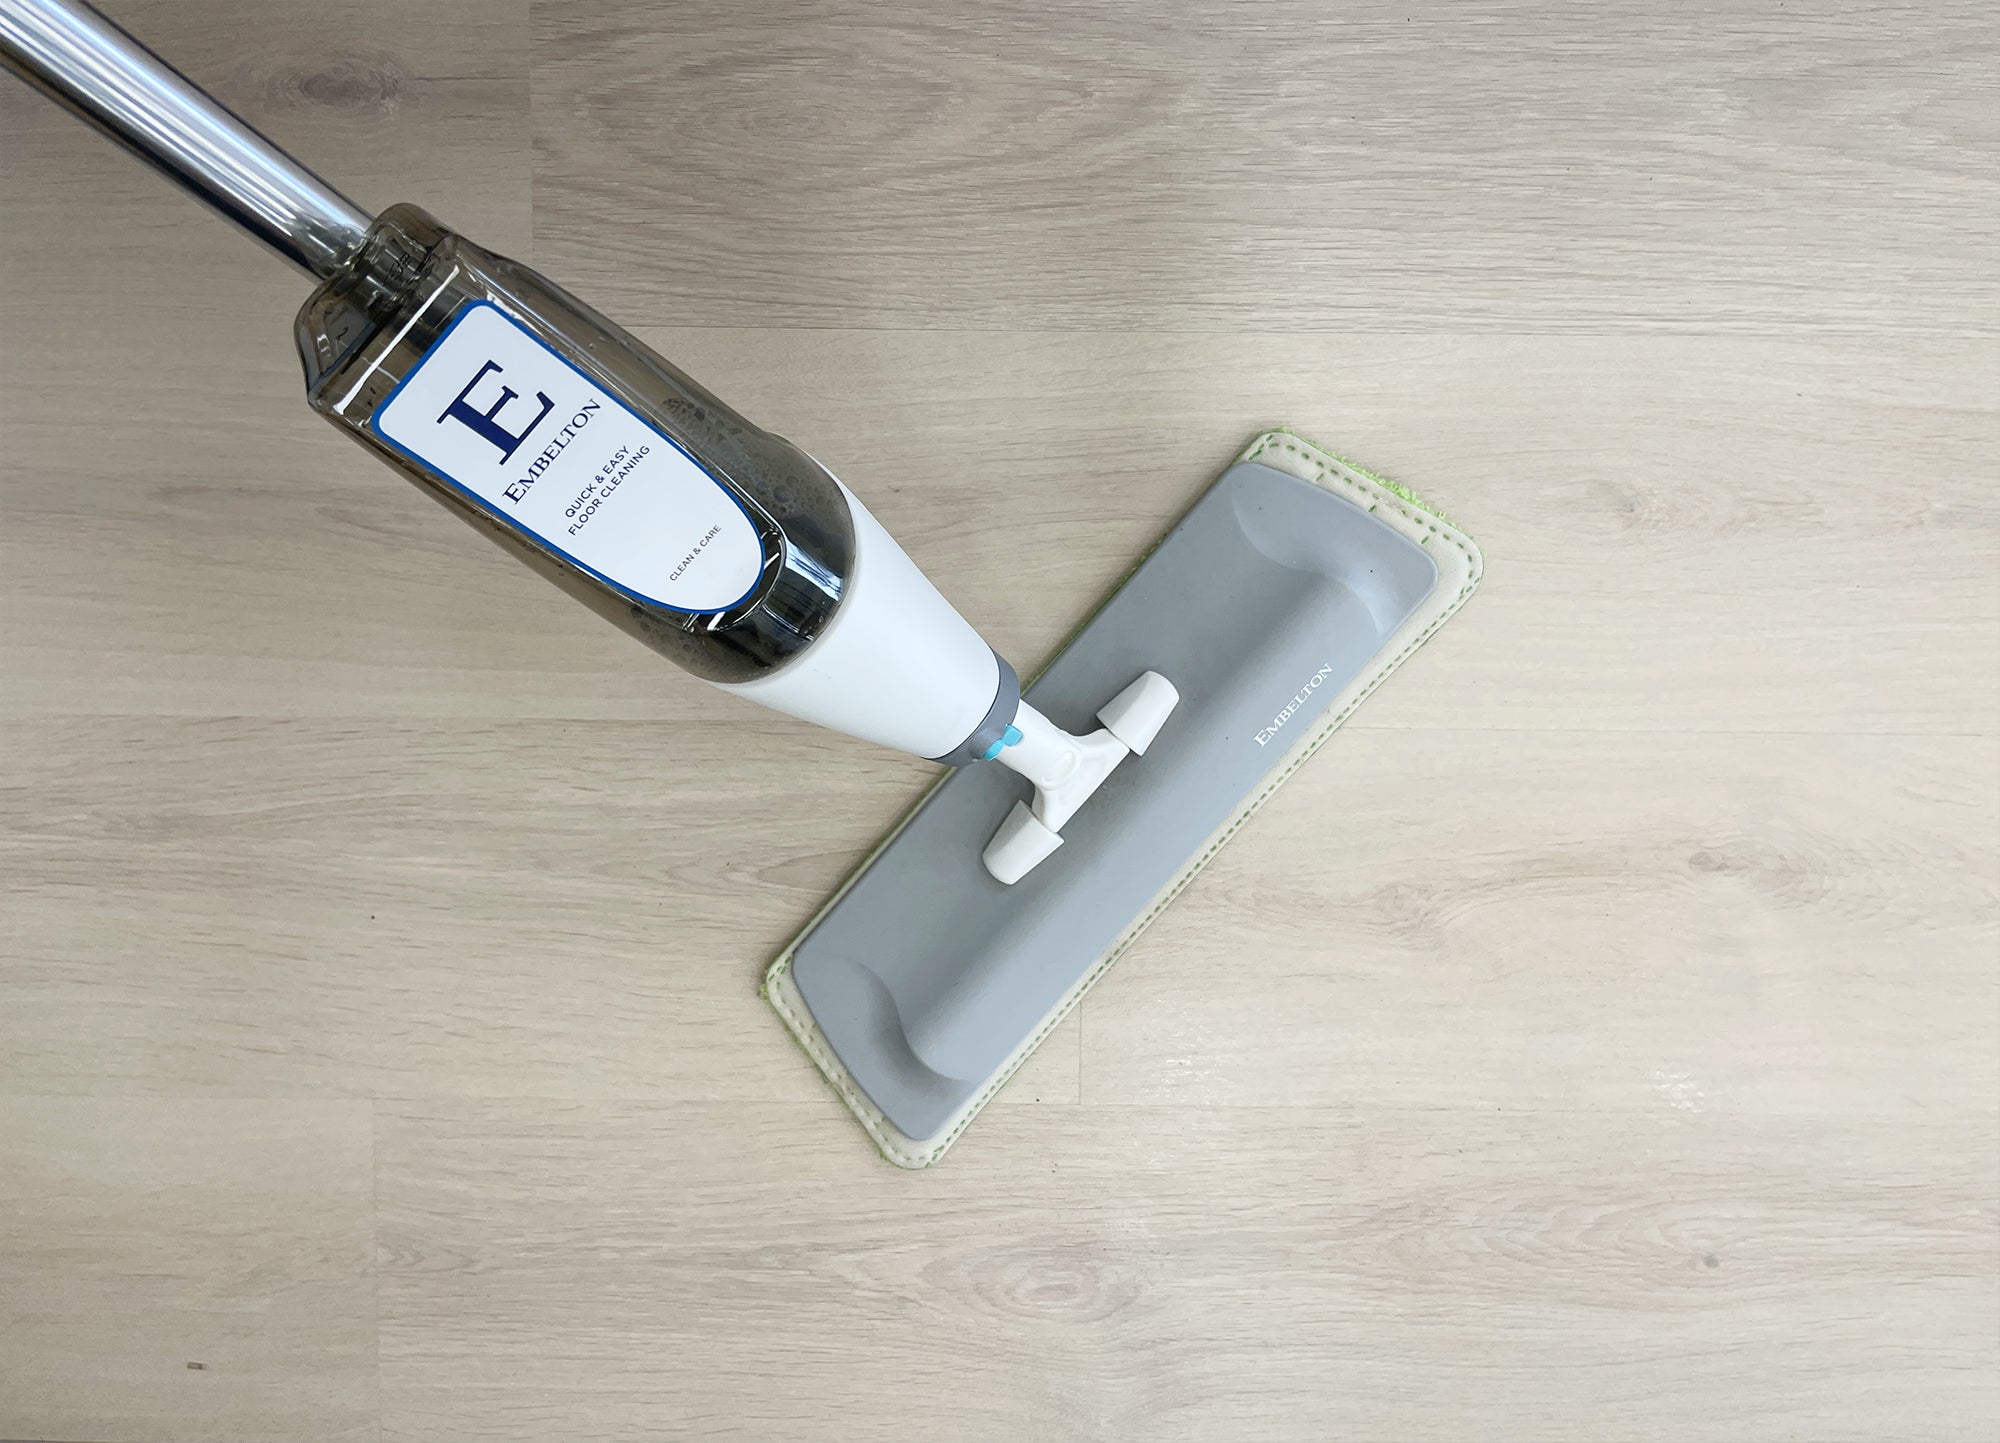 How to clean Laminate Flooring